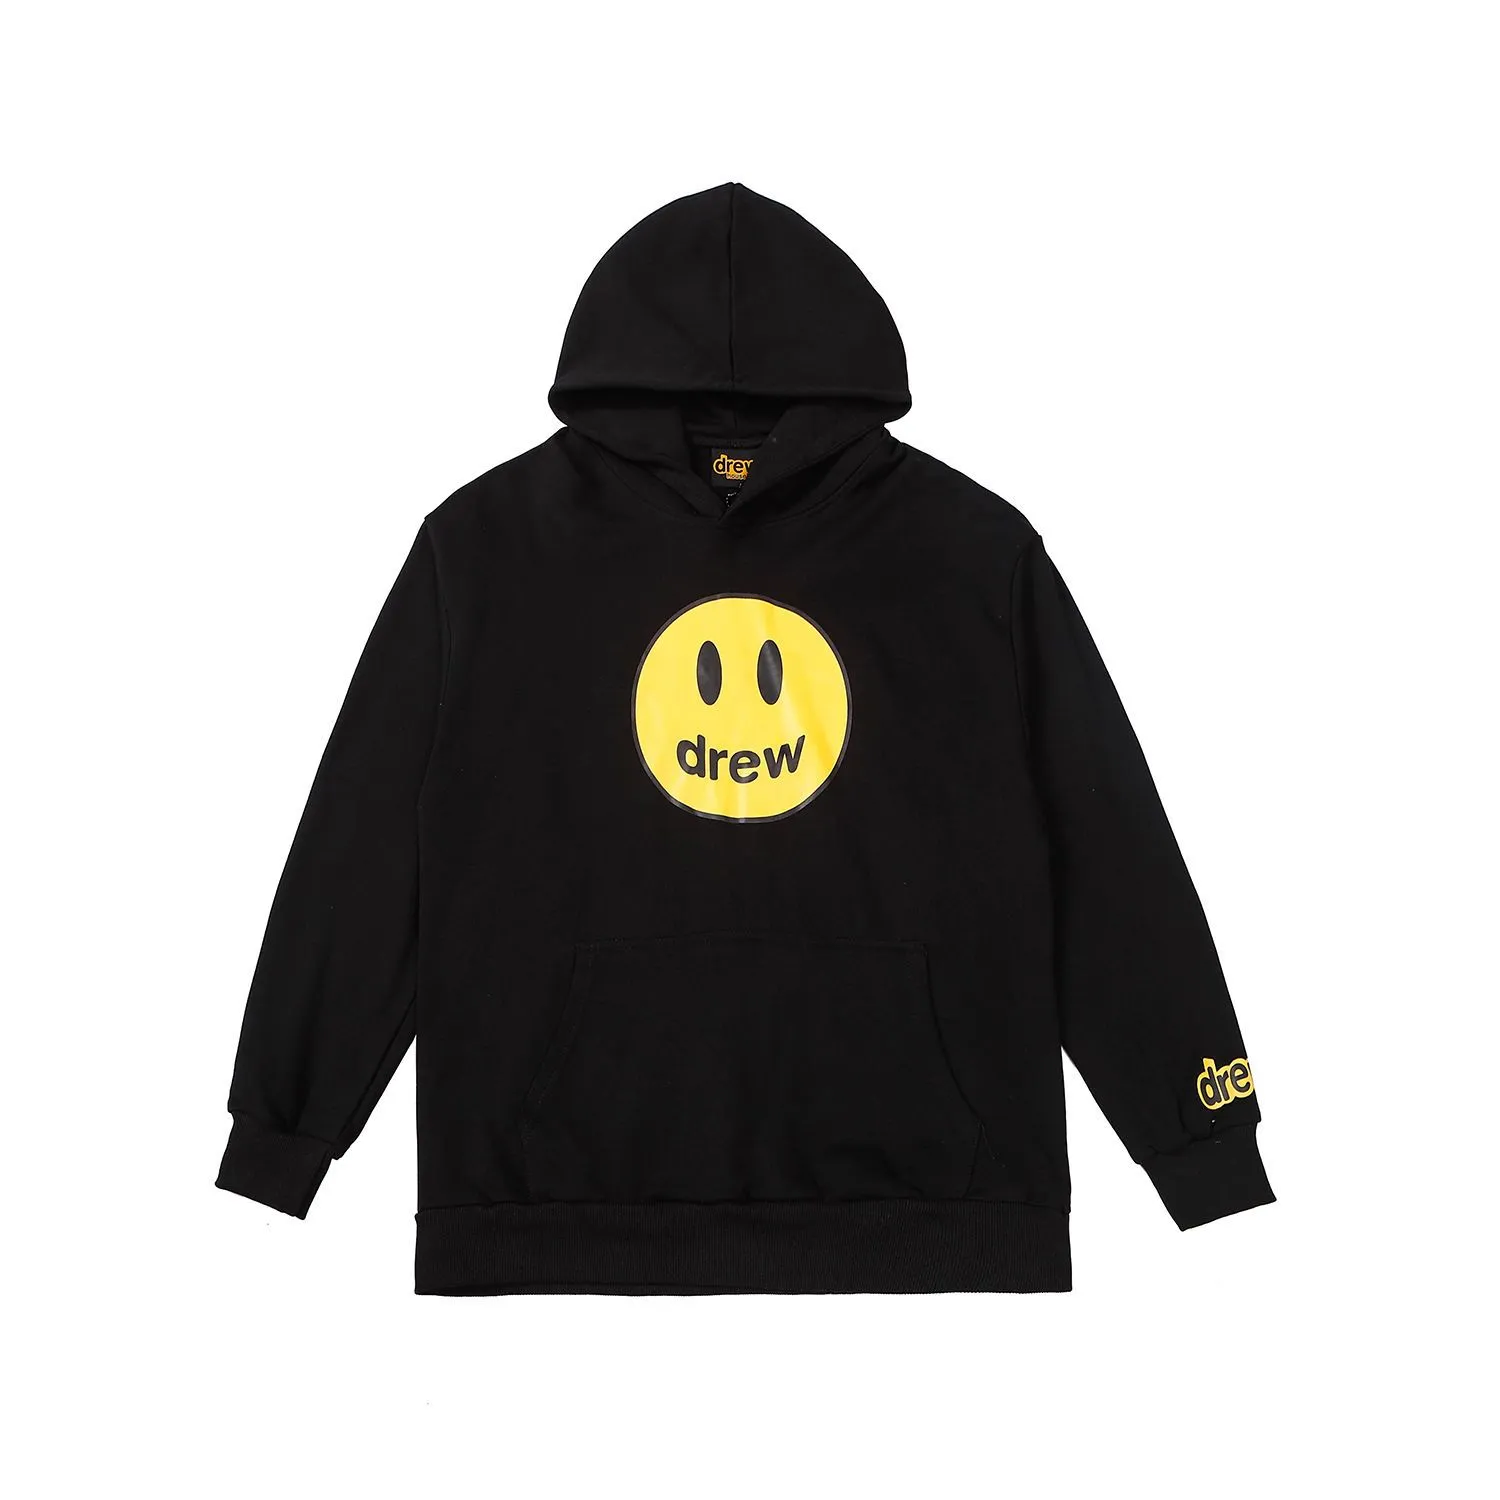 Unleash Style with the Black Drew Hoodie: A Fashion Essential